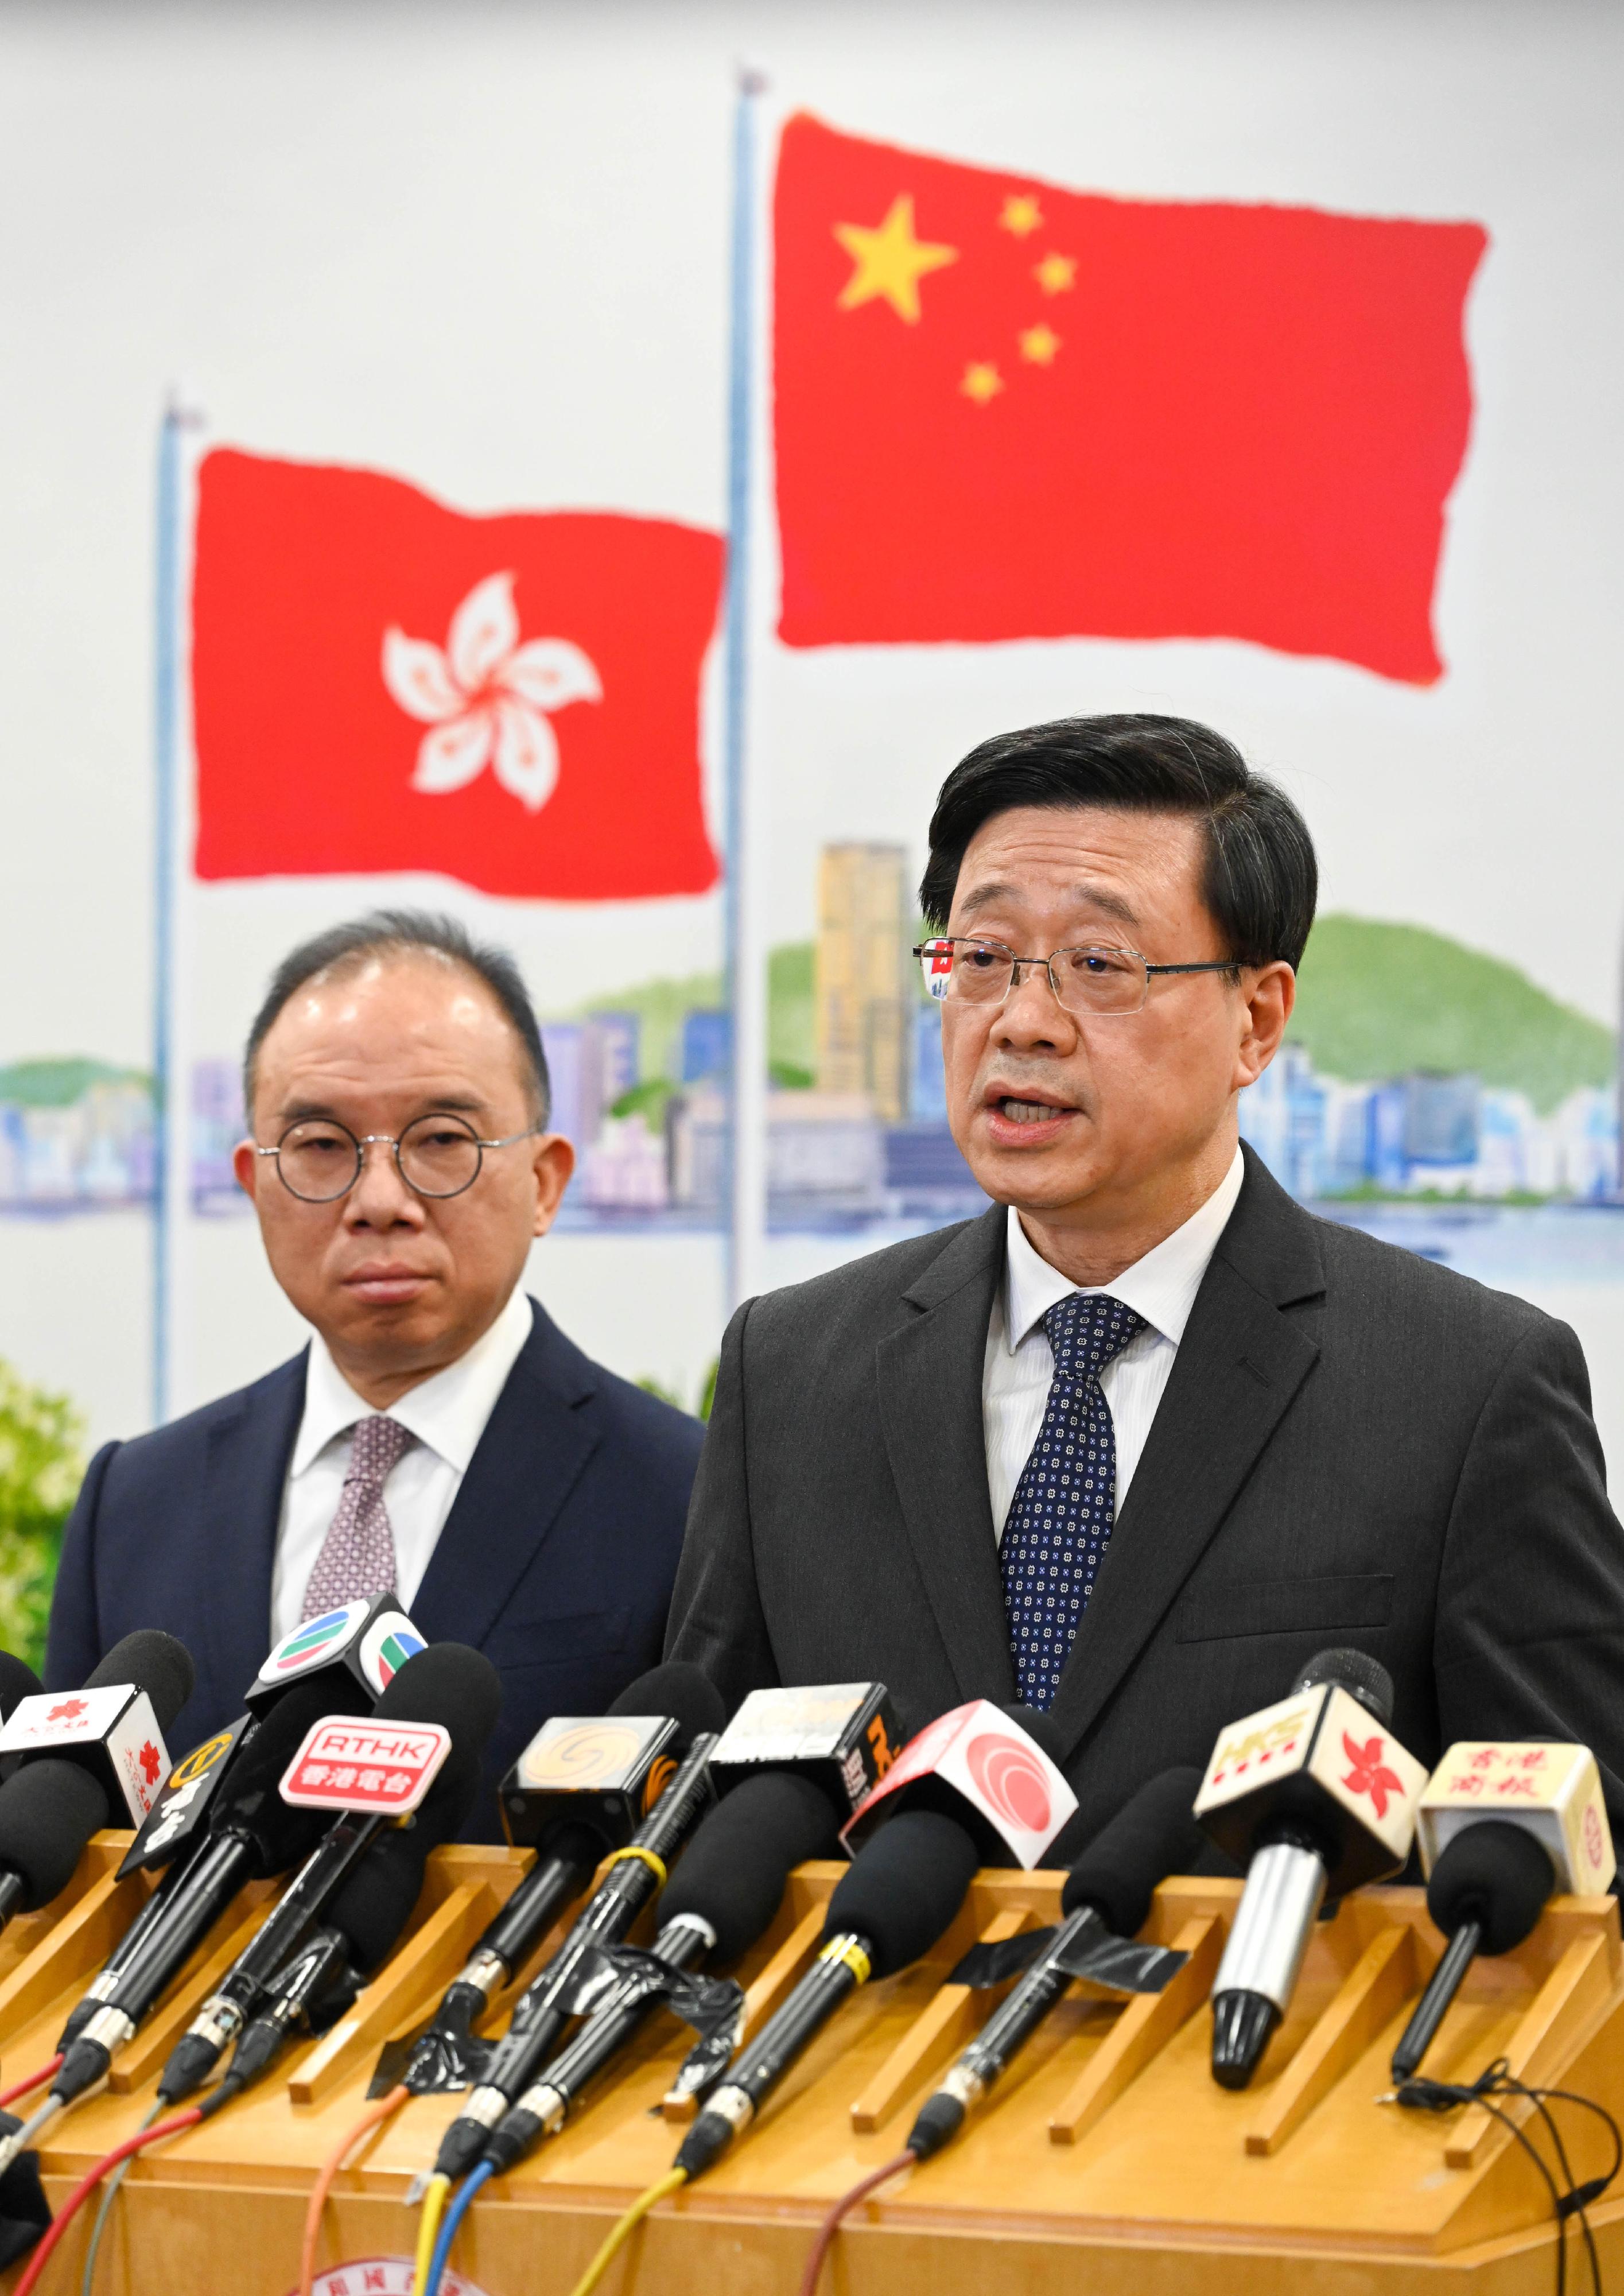 The Chief Executive, Mr John Lee (right), meets the media in Beijing today (March 17). Looking on is the Secretary for Constitutional and Mainland Affairs, Mr Erick Tsang Kwok-wai (left).